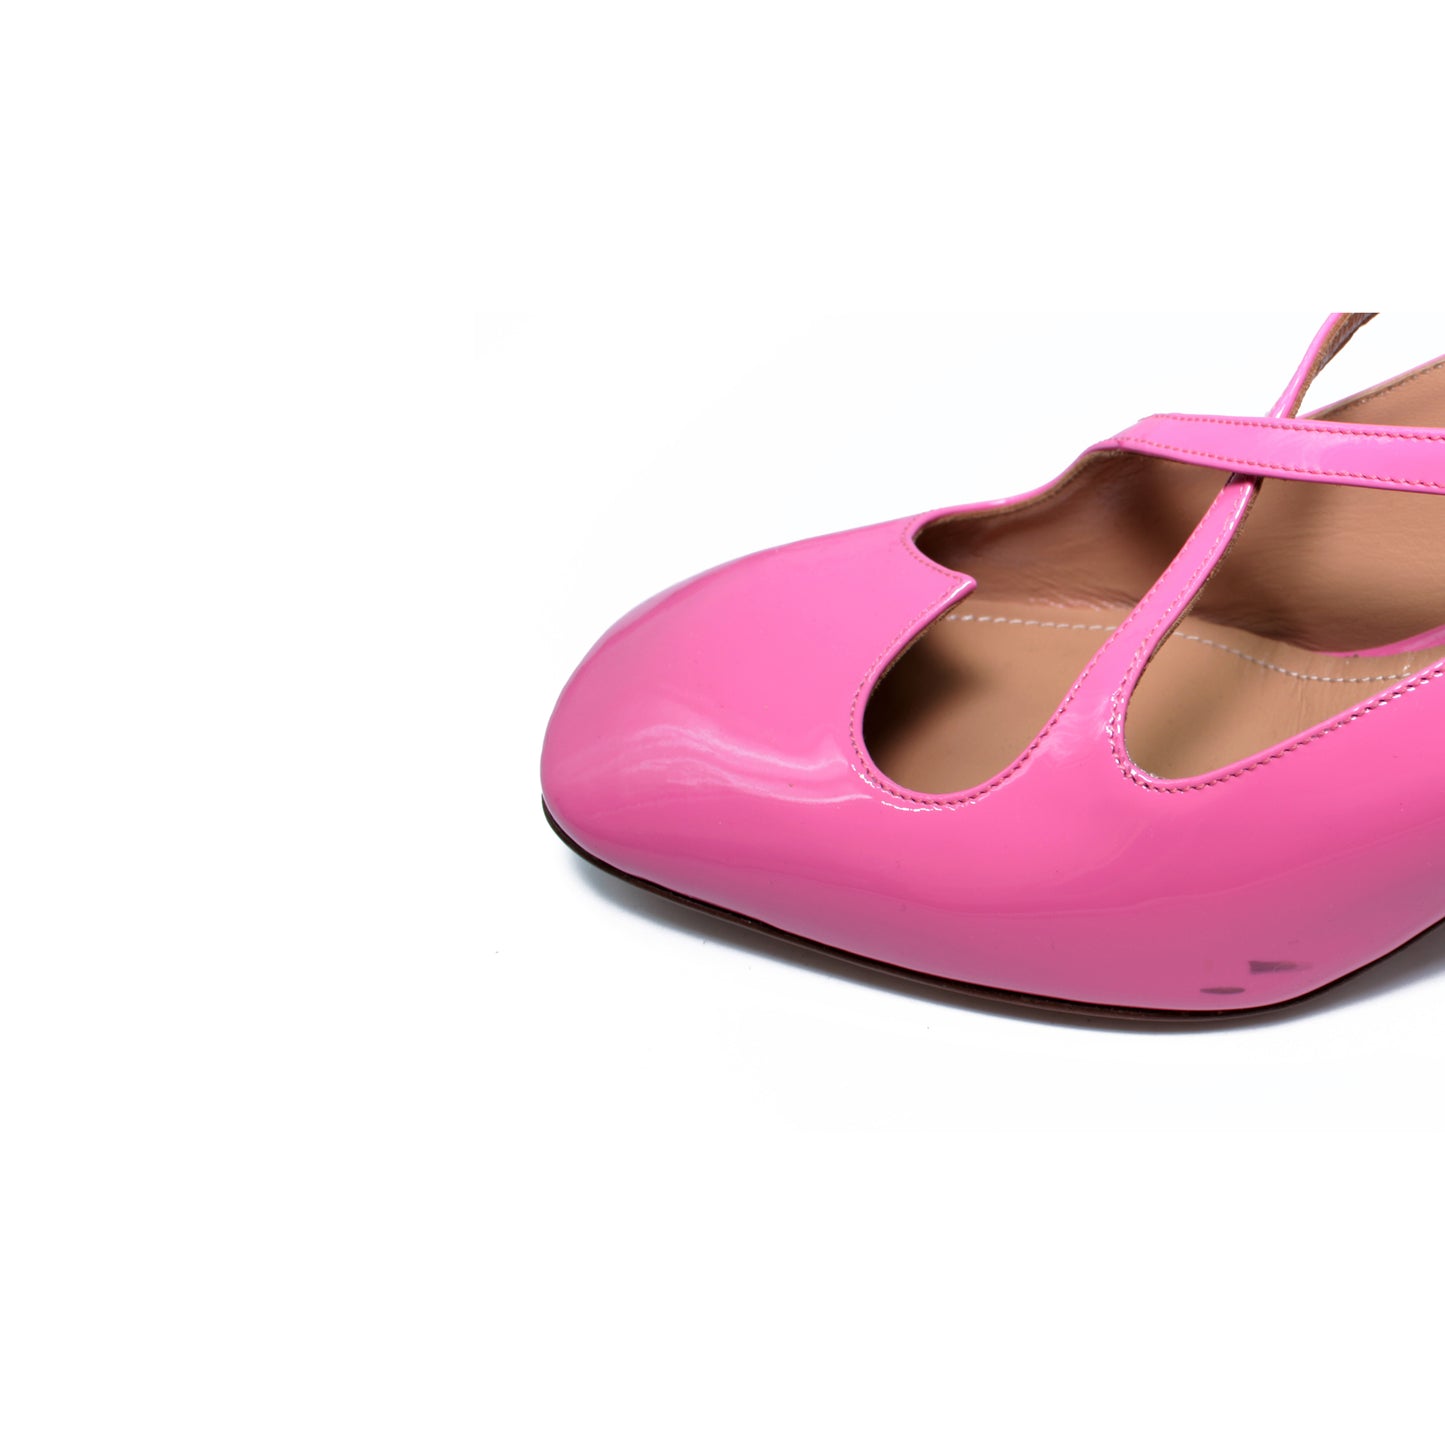 Sling Back Two for Love in bubblegum patent leather - Second life